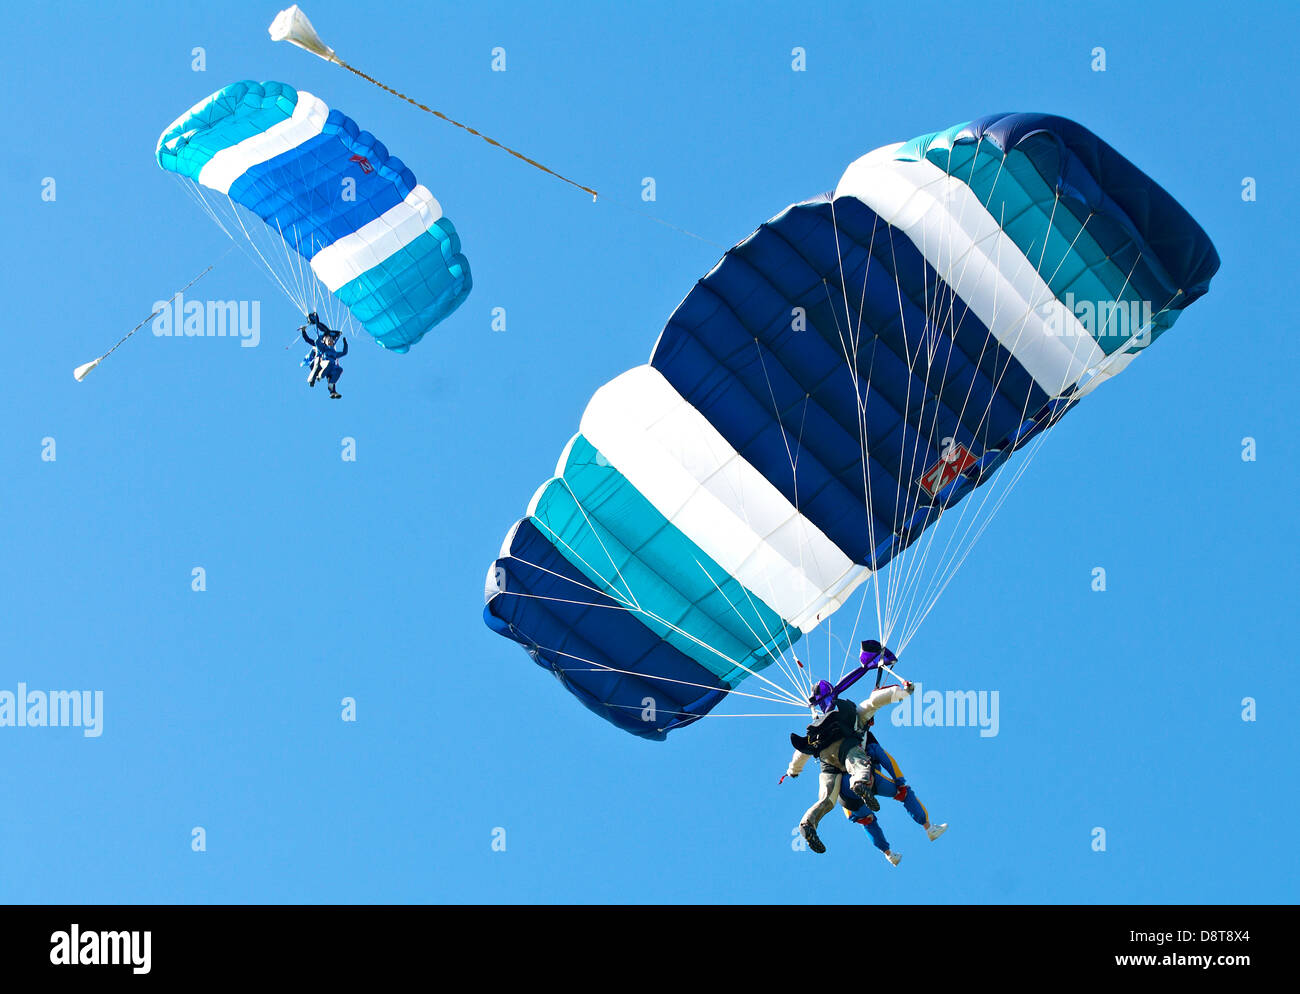 Parachute sky diving jumpers Stock Photo